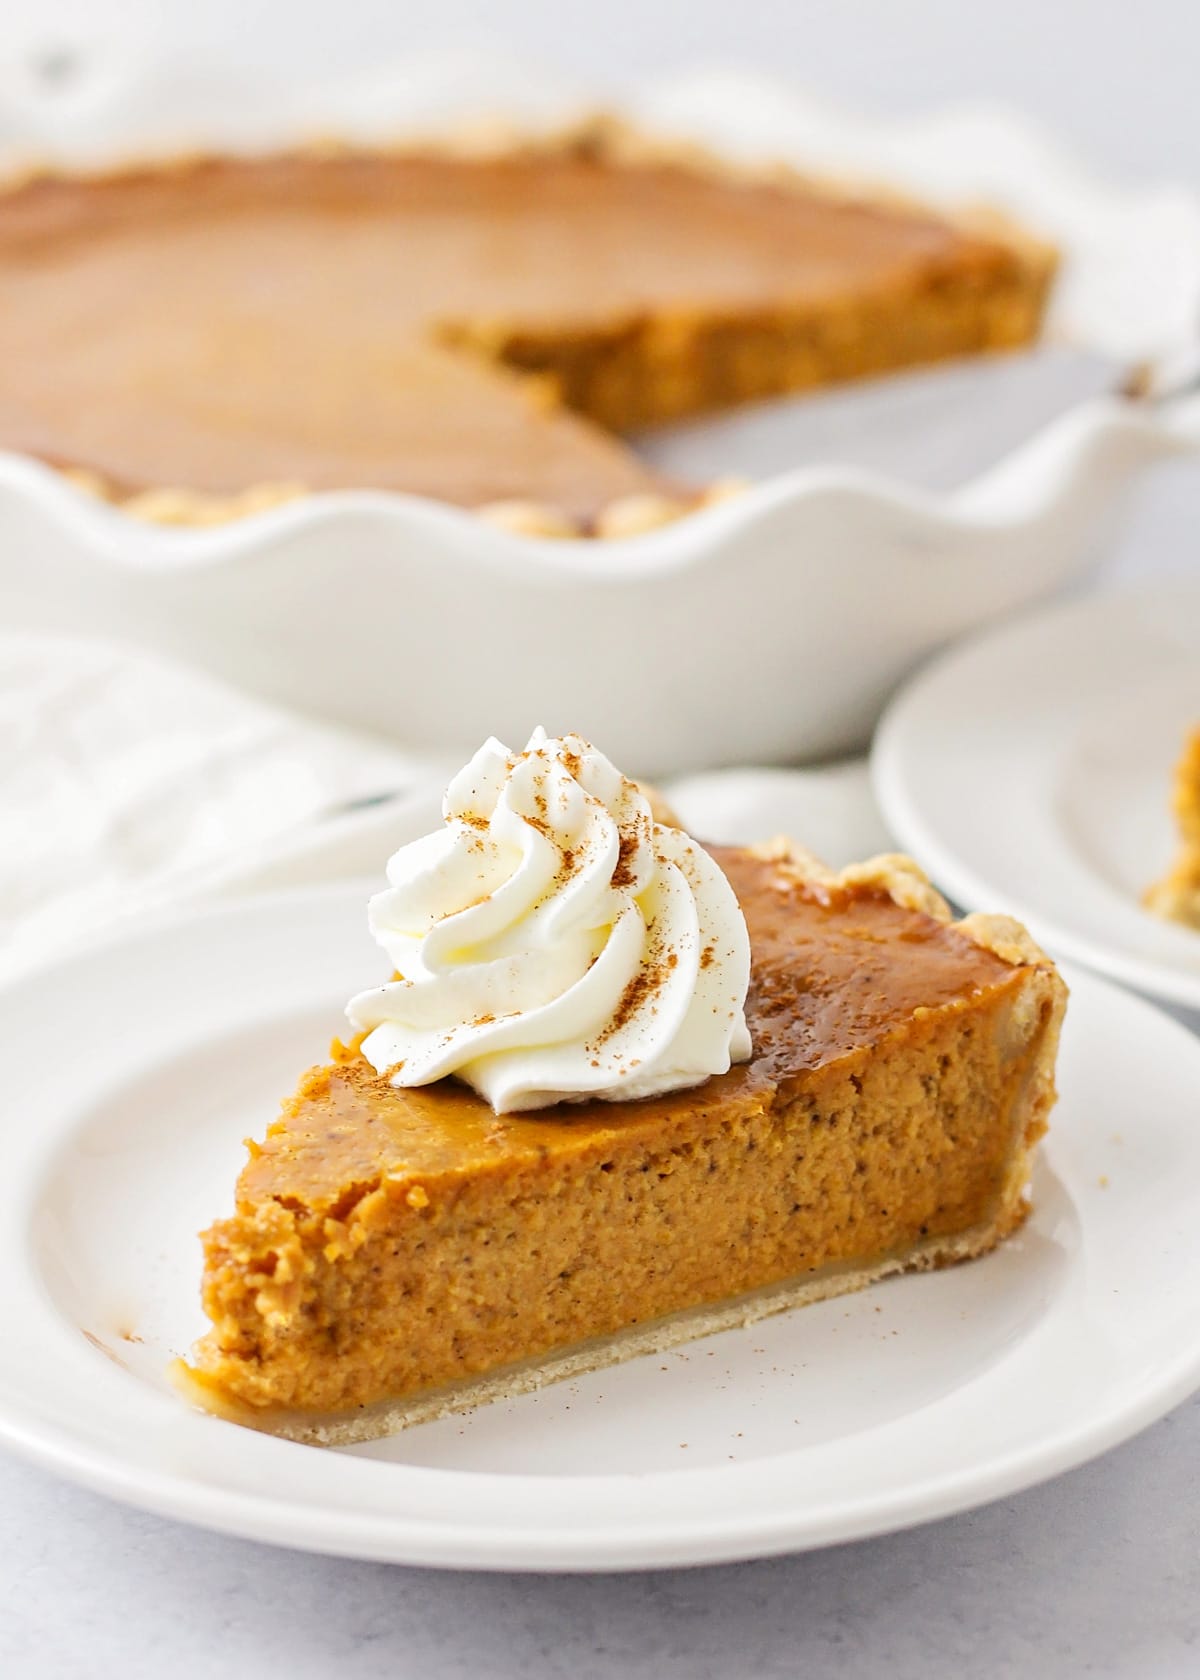 Slice of homemade Pumpkin Pie Recipe on a plate topped with whipped cream.